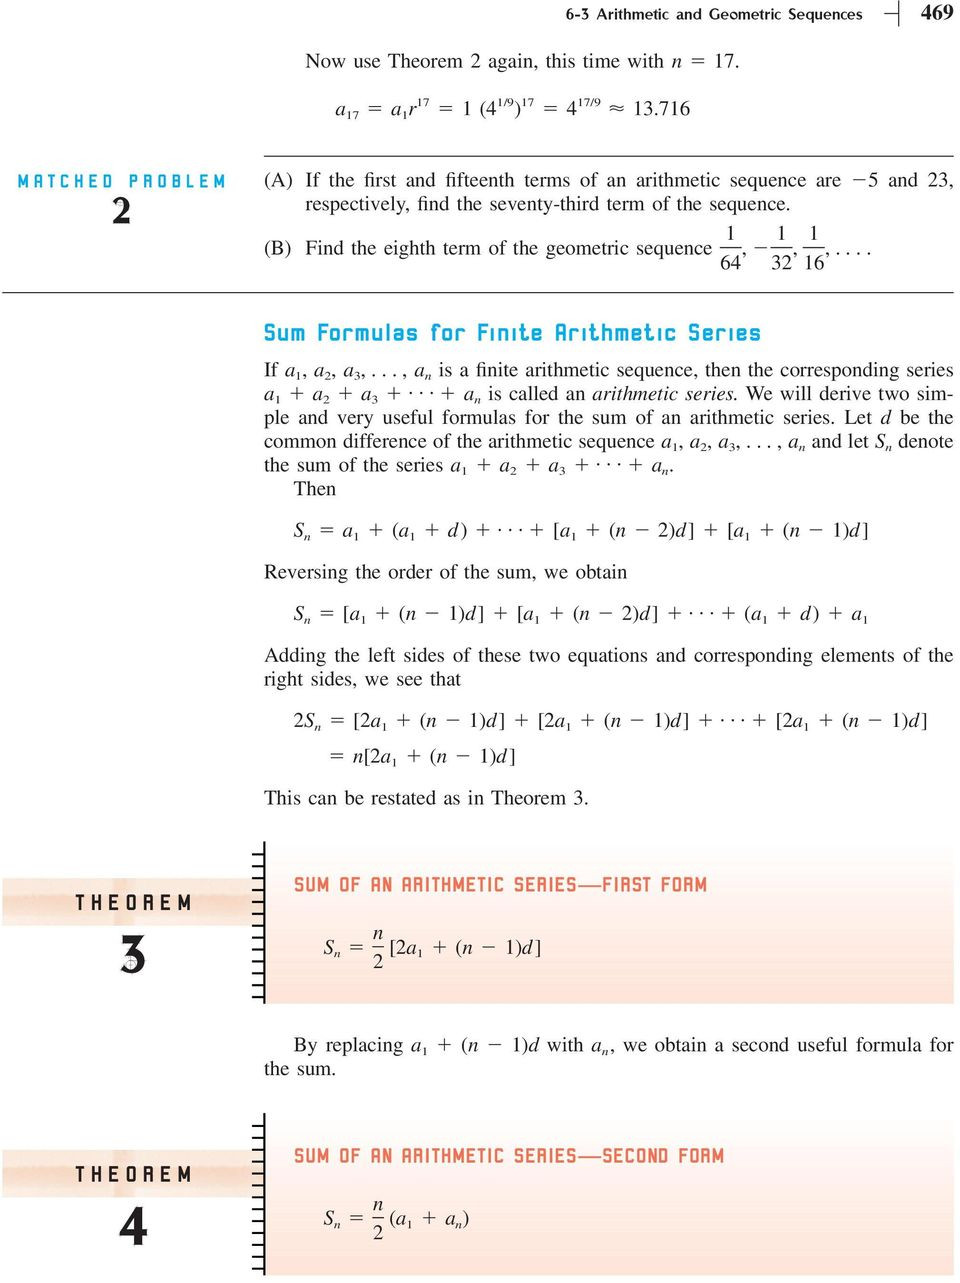 Arithmetic Sequence Worksheet Algebra 1 Section 6 3 Arithmetic and Geometric Sequences Pdf Free